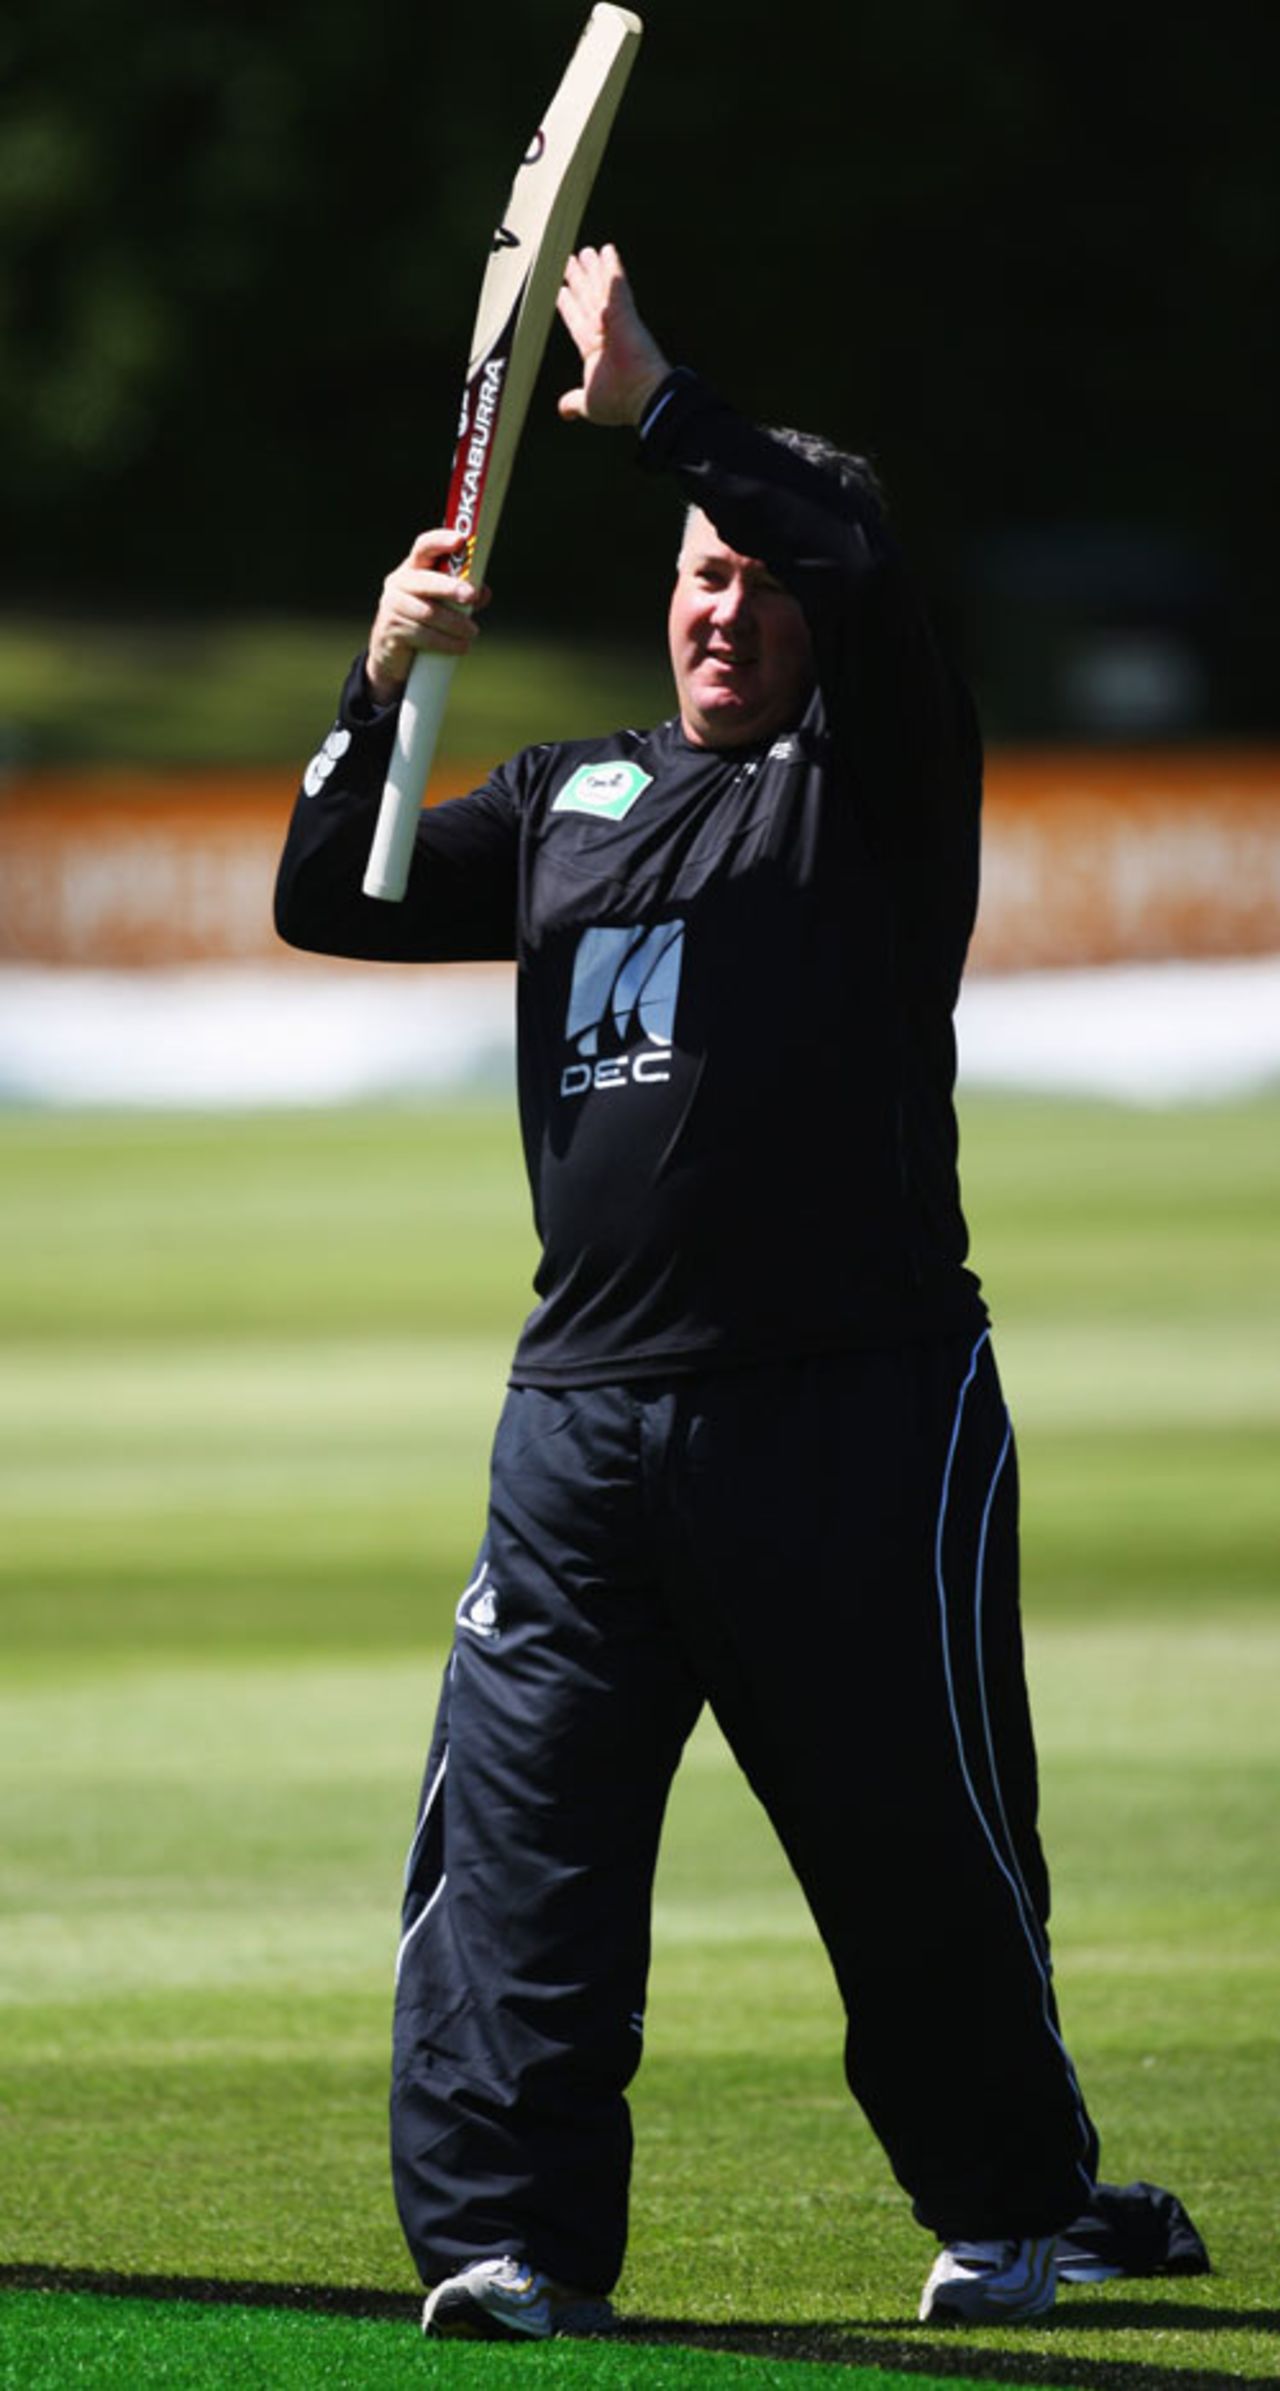 New Zealand coach Andy Moles applauds one of his player's efforts during the team warm-up, New Zealand v West Indies, 1st Test, Dunedin, 1st day, December 11, 2008